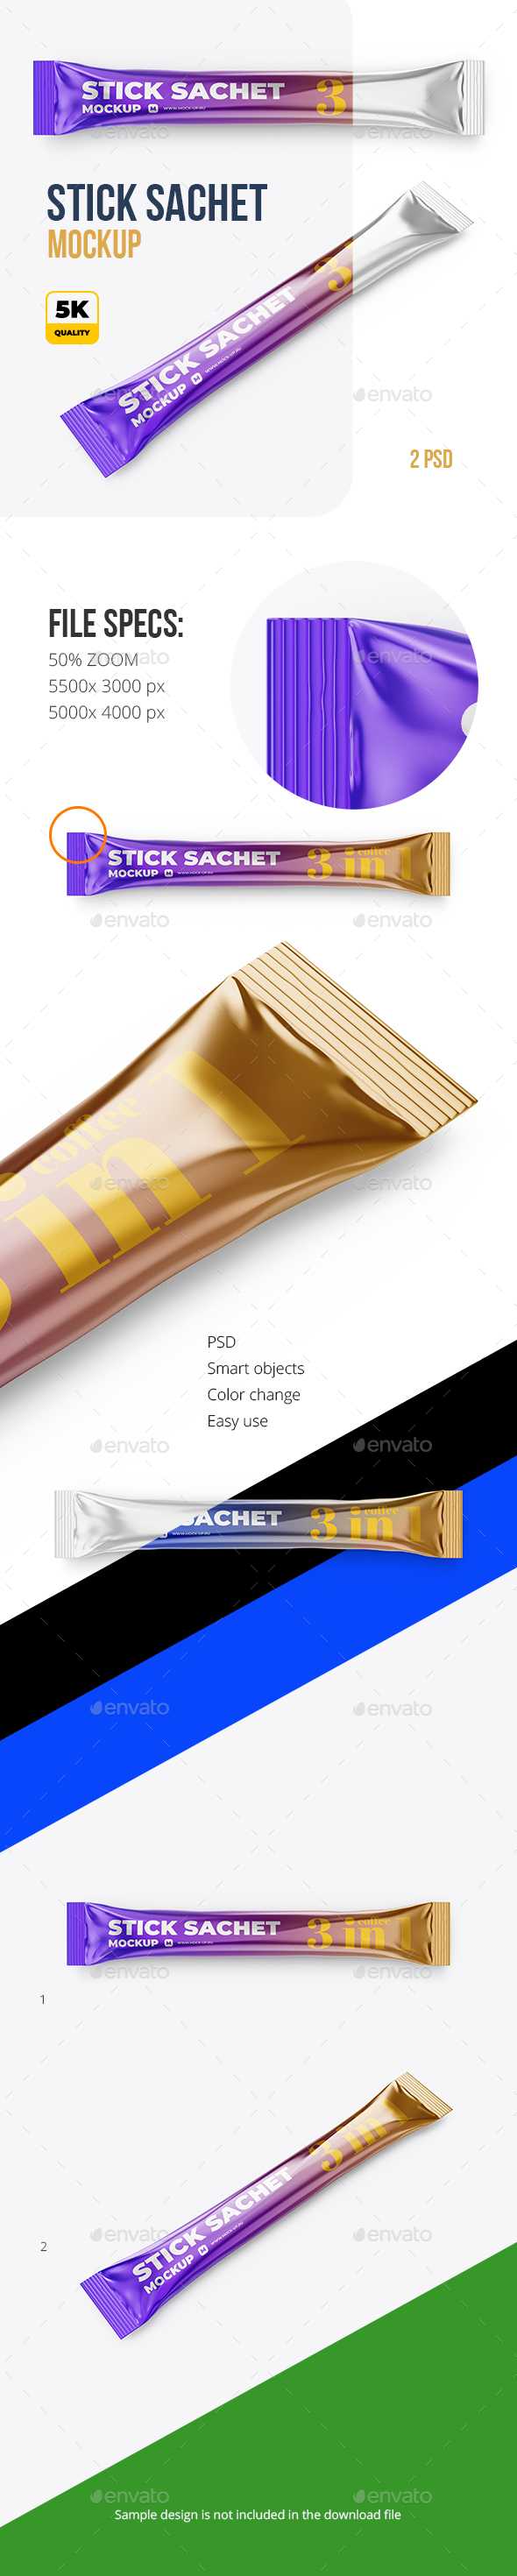 Download Thin Stick Sachet Mockup 2 Psd By Mock Up Ru Graphicriver